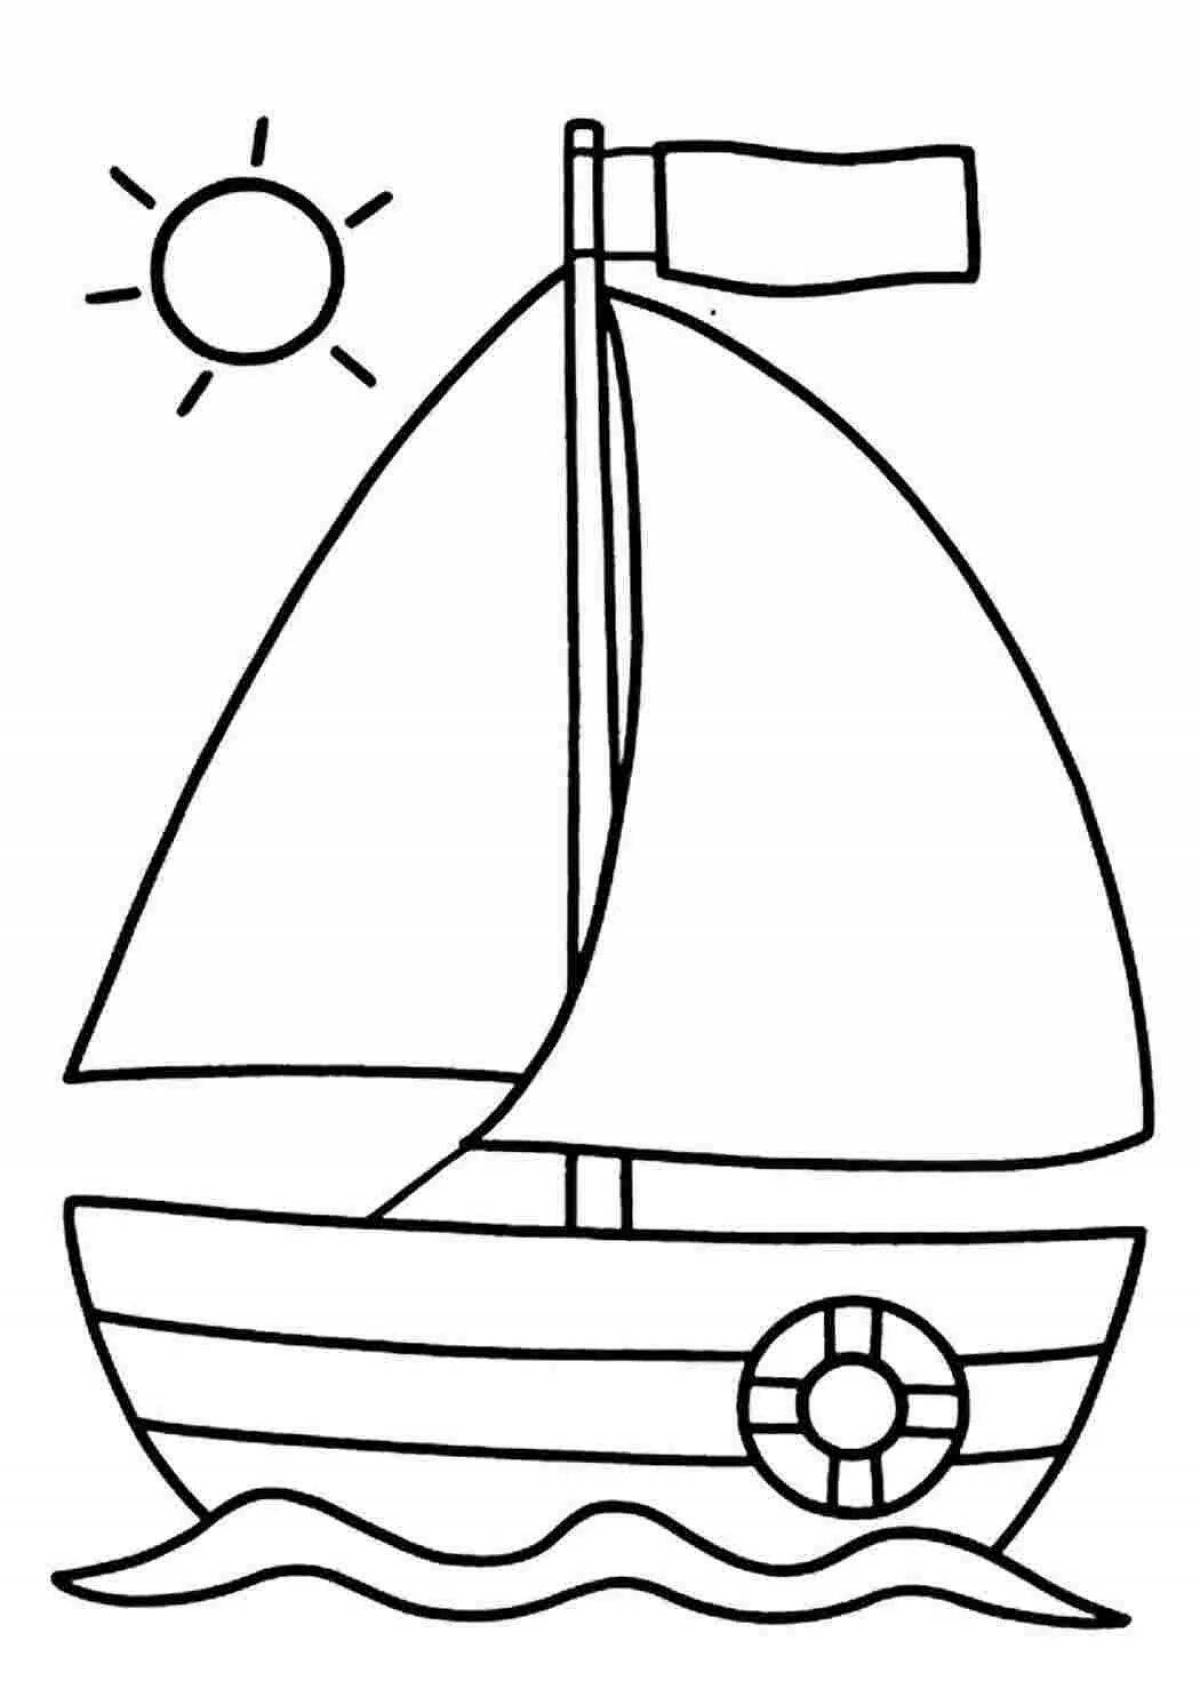 Coloring boat for children 4-5 years old